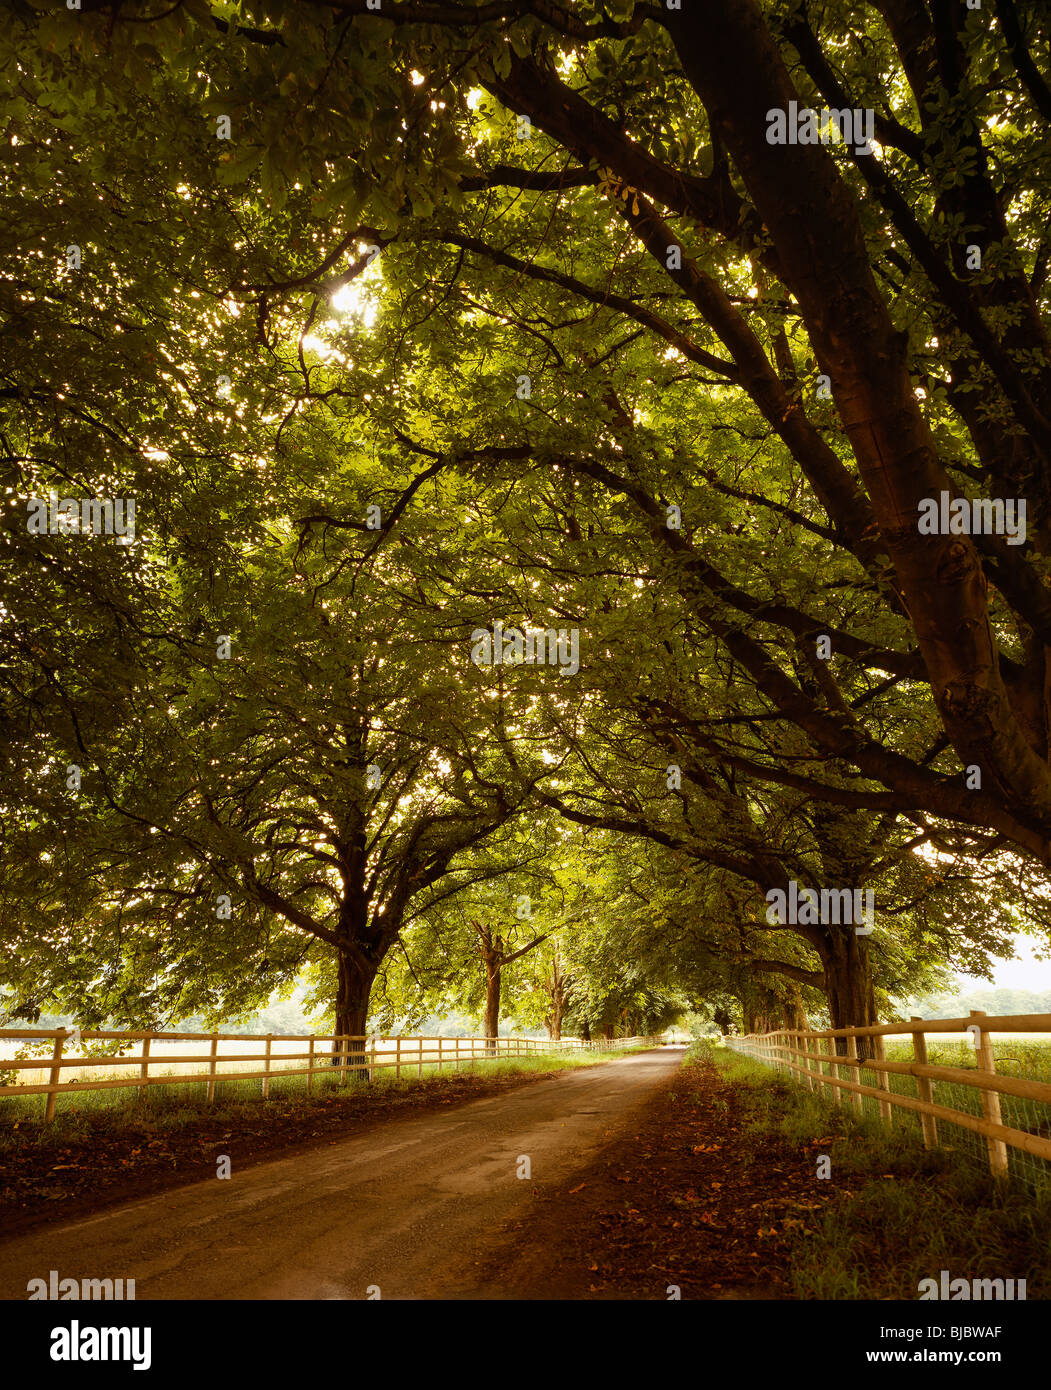 DIRT ROAD IN THE COUNTRY LINED WITH TREES UK. Stock Photo